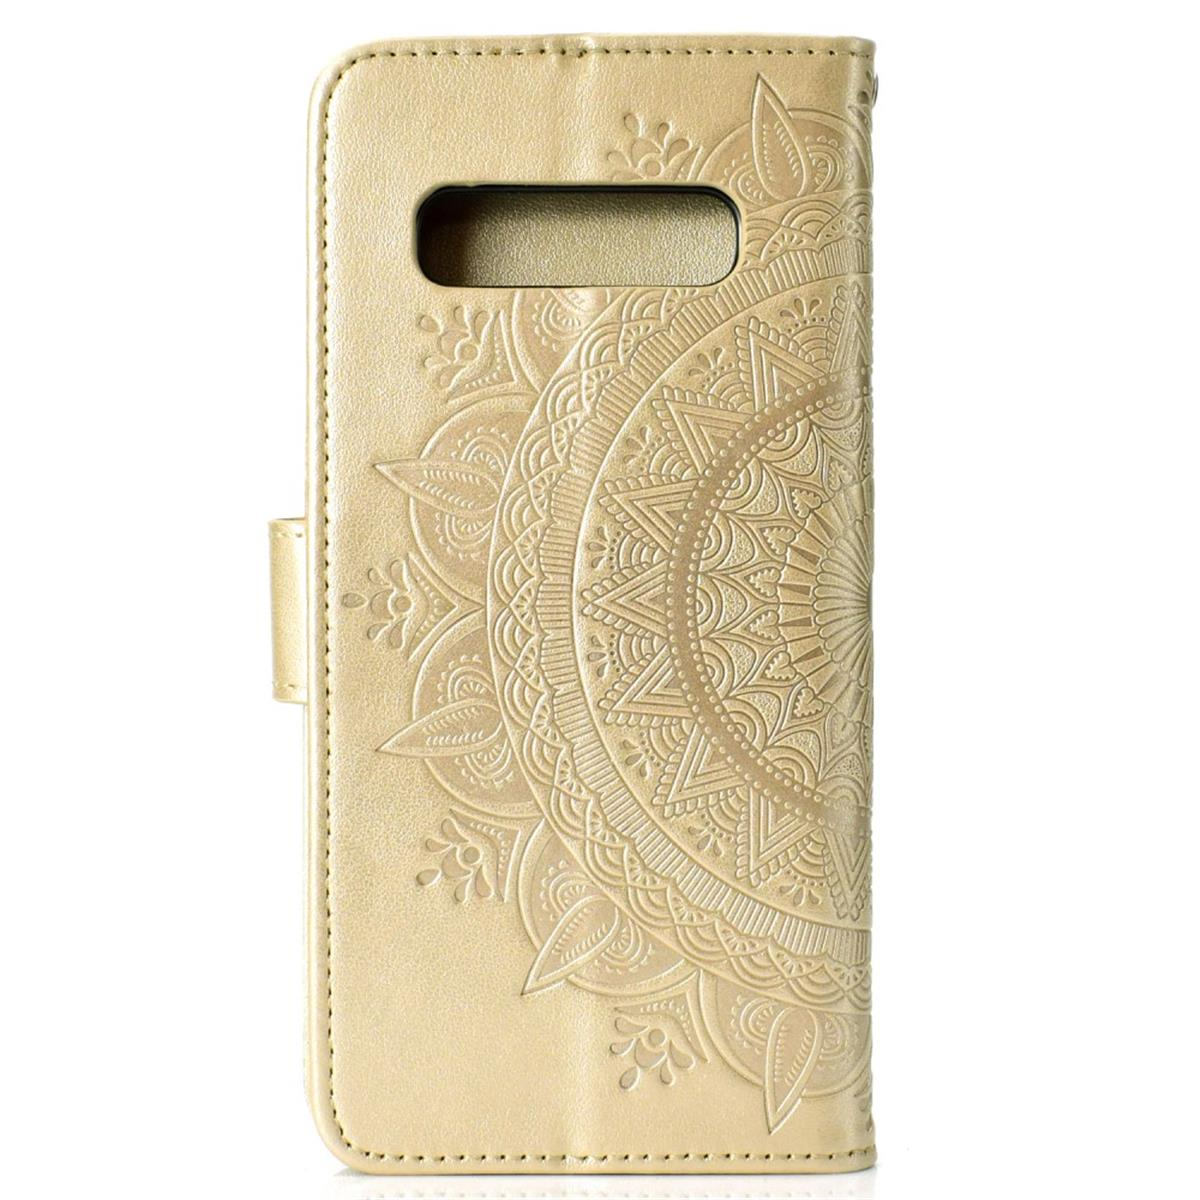 Bookcover, mit Muster, Klapphülle Galaxy Samsung, Gold [Plus], COVERKINGZ Mandala S10+